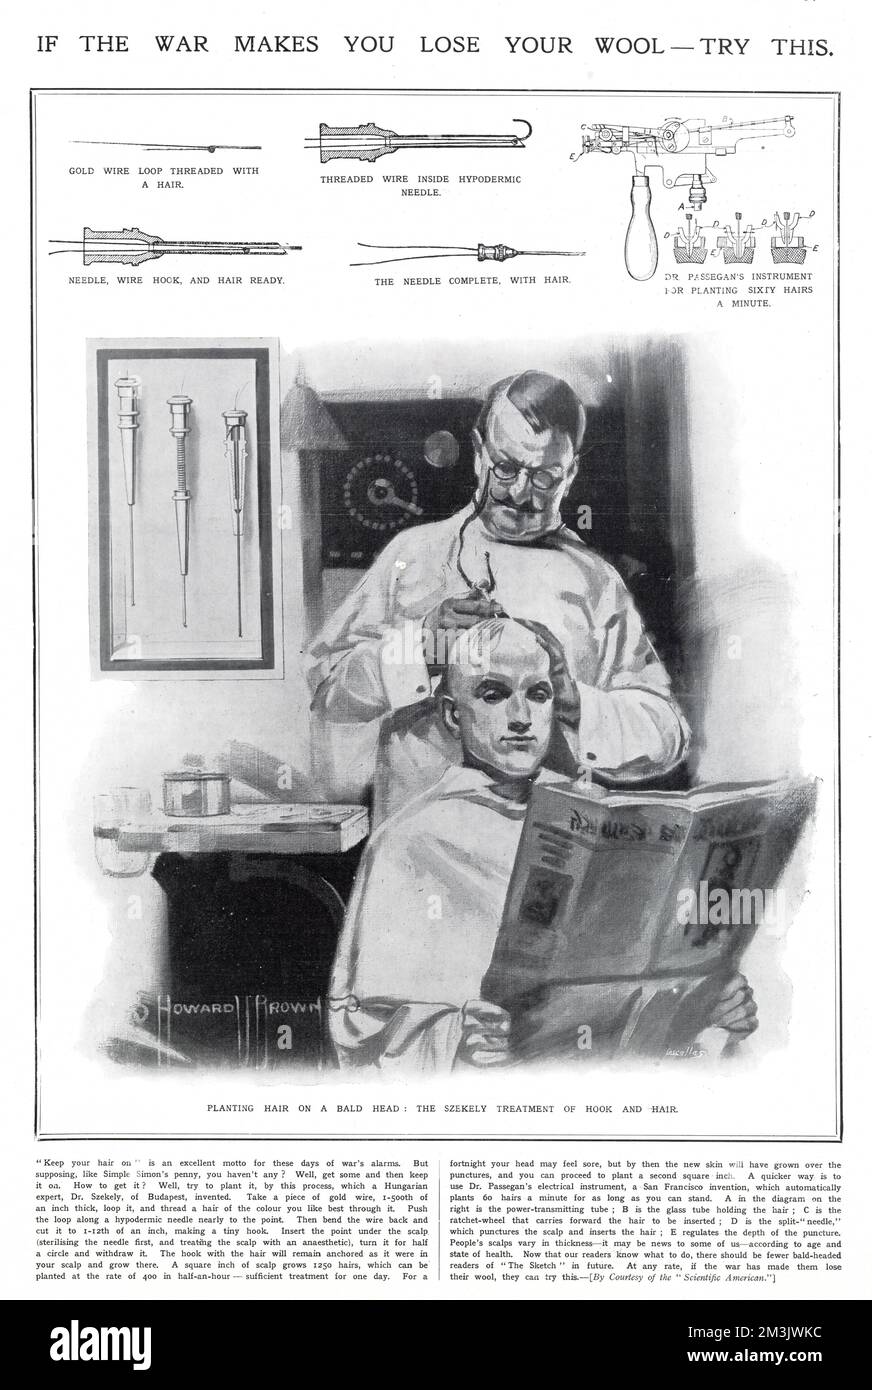 Entitled, 'If the War Makes you Lose Your Wool - Try This', this illustration shows an early form of hair transplanting, championed by a Dr. Szekely of Budapest. The technique, which threaded a wire with hair, which was then injected into the scalp through a hypodermic needle, could apparently plant as many as sixty hairs a minute in the patient's head, without, according to the picture, discomfort. Stock Photo